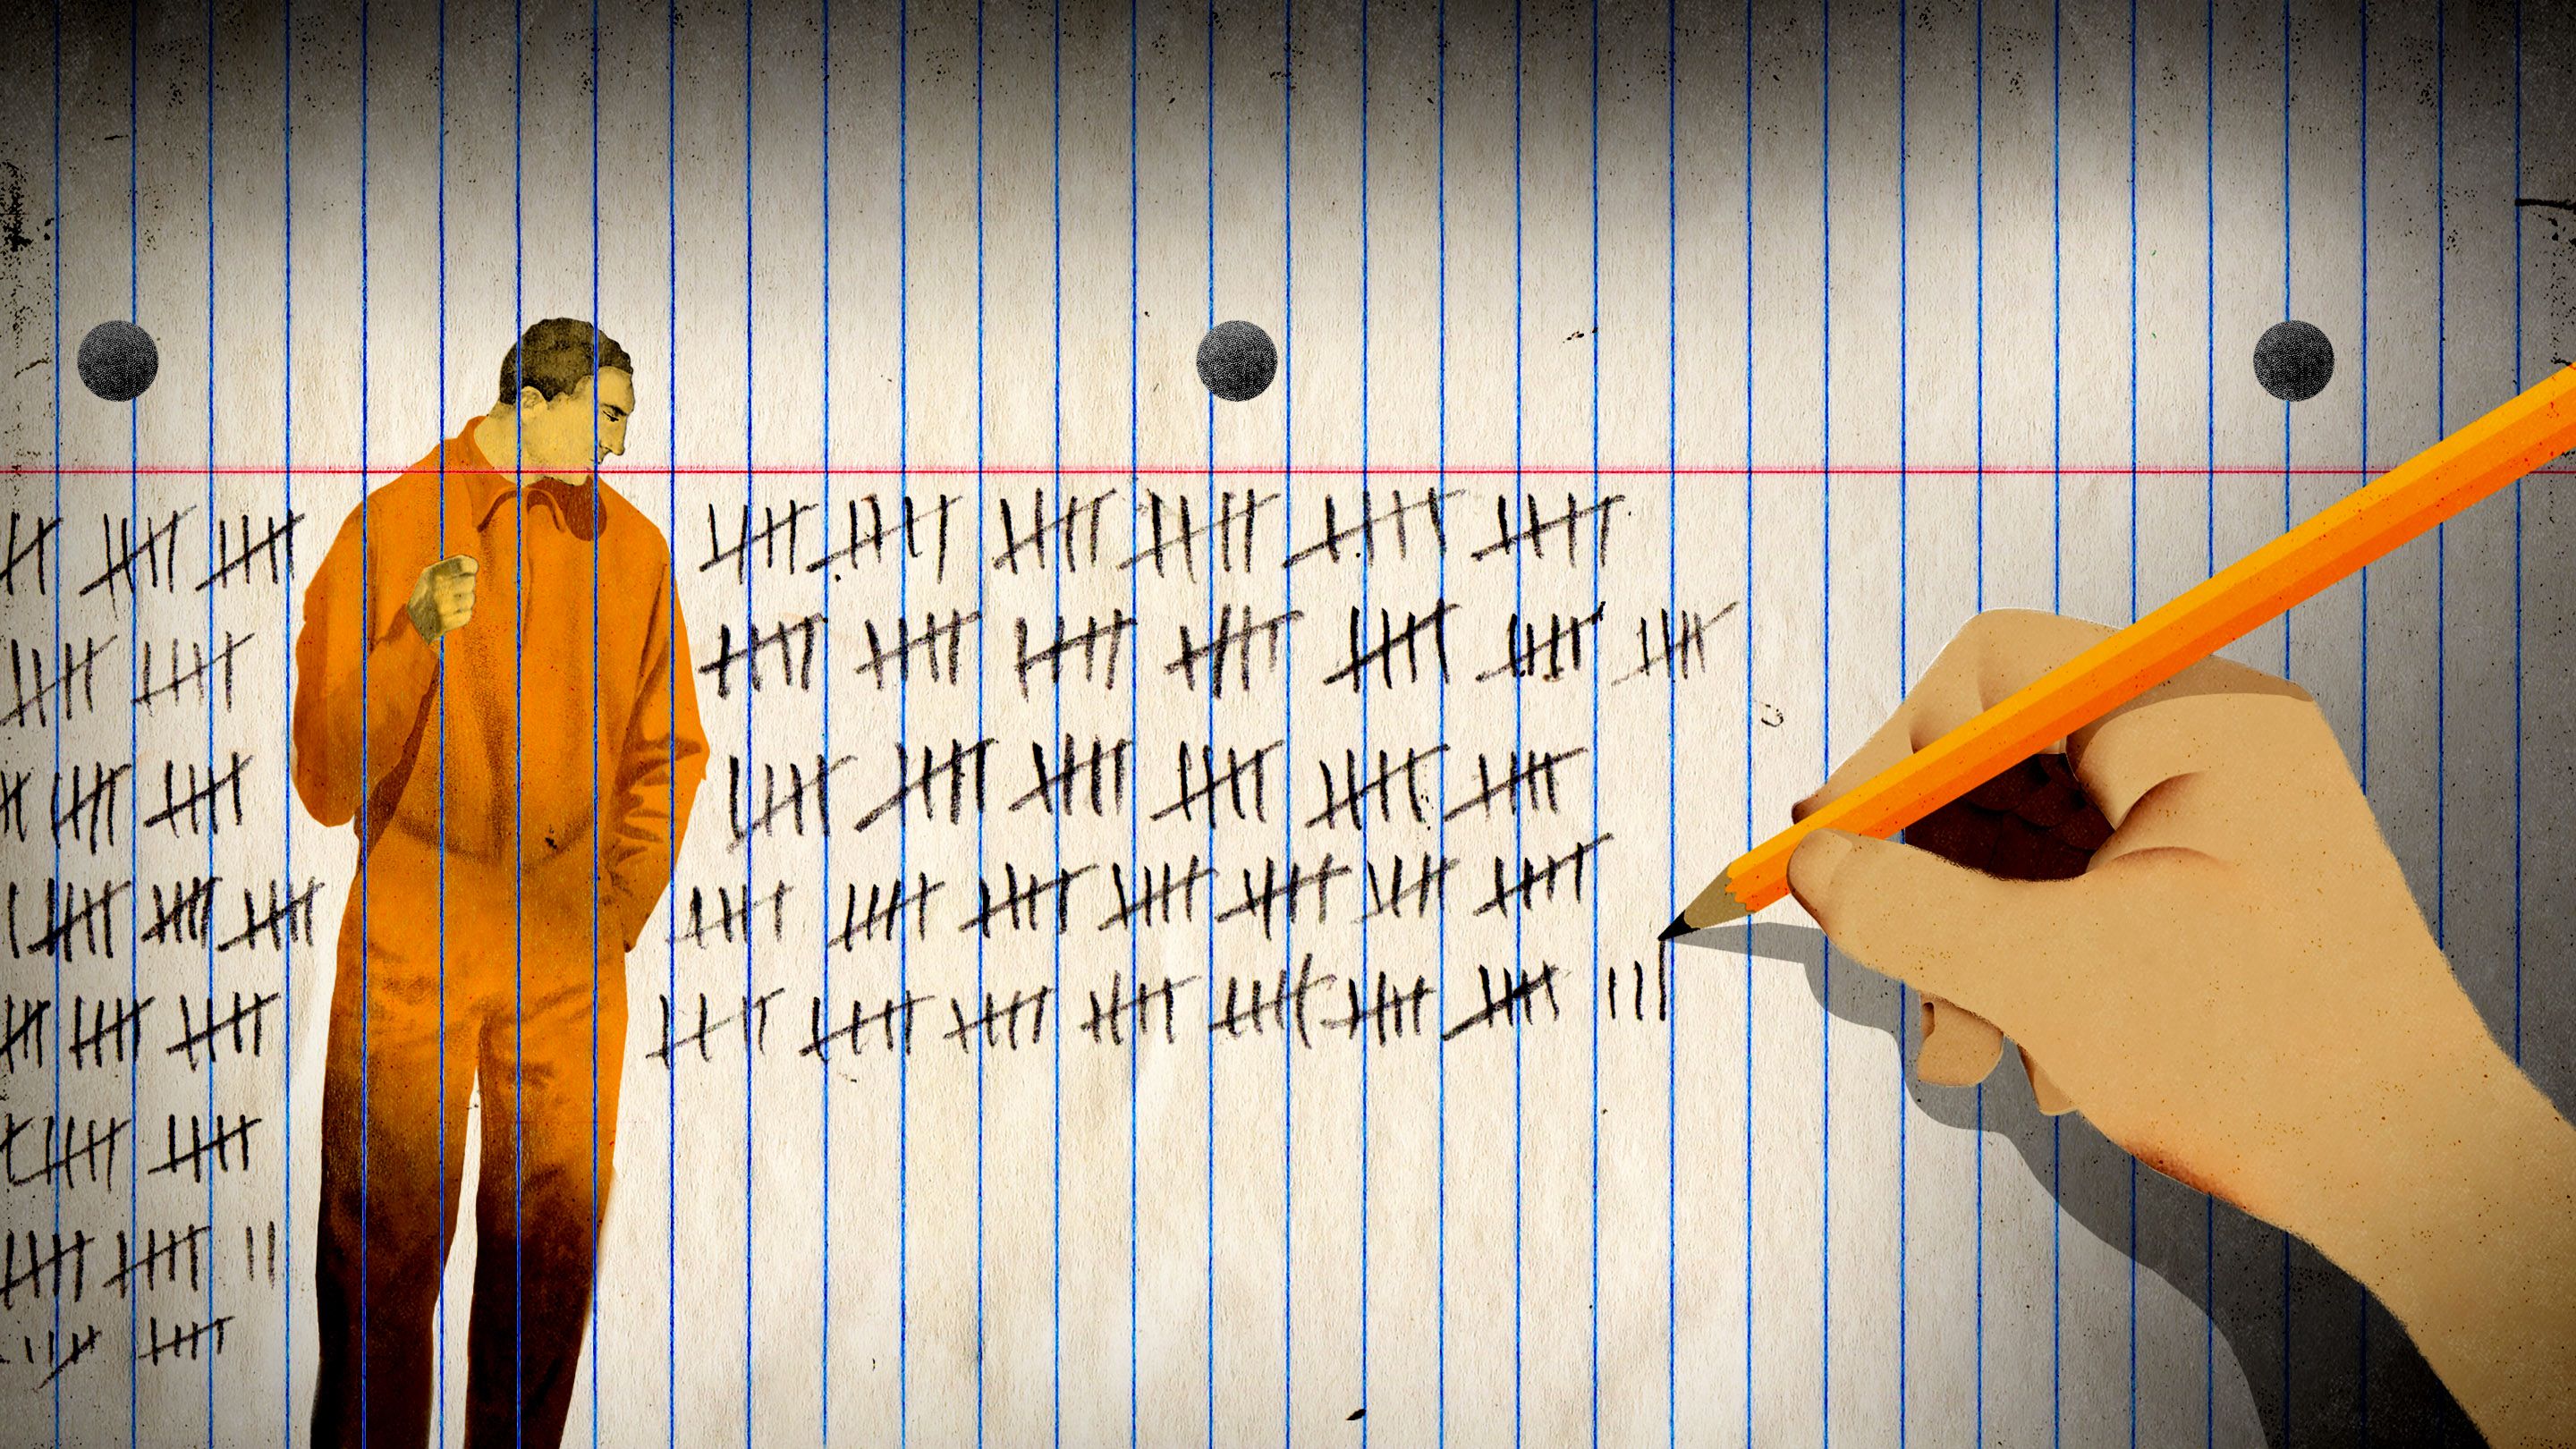 Locked Away: The Toll of Mass Incarceration on Students